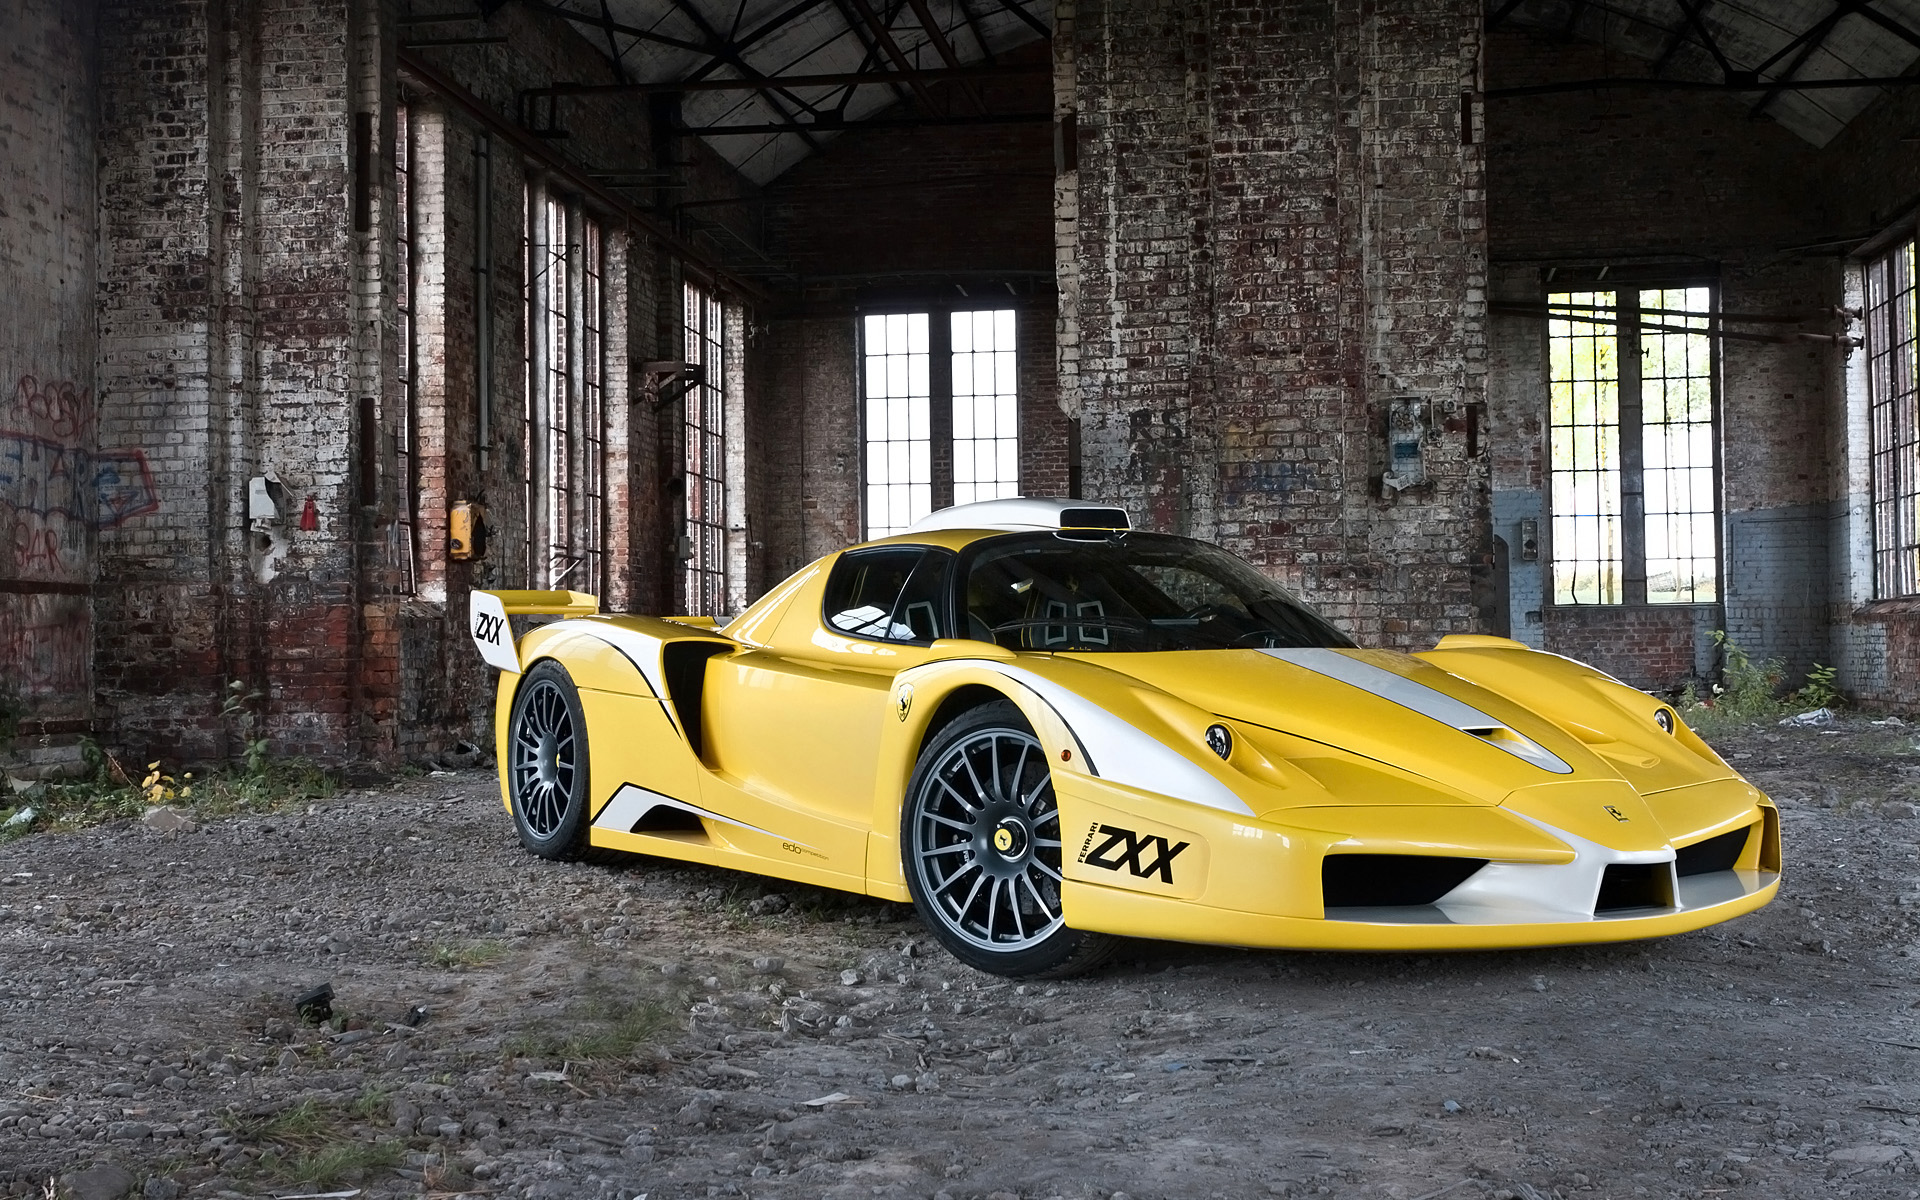 2012, Edo competition, Ferrari, Enzo, Zxx, Supercar, Supercars, Tuning, Hd Wallpapers HD ...